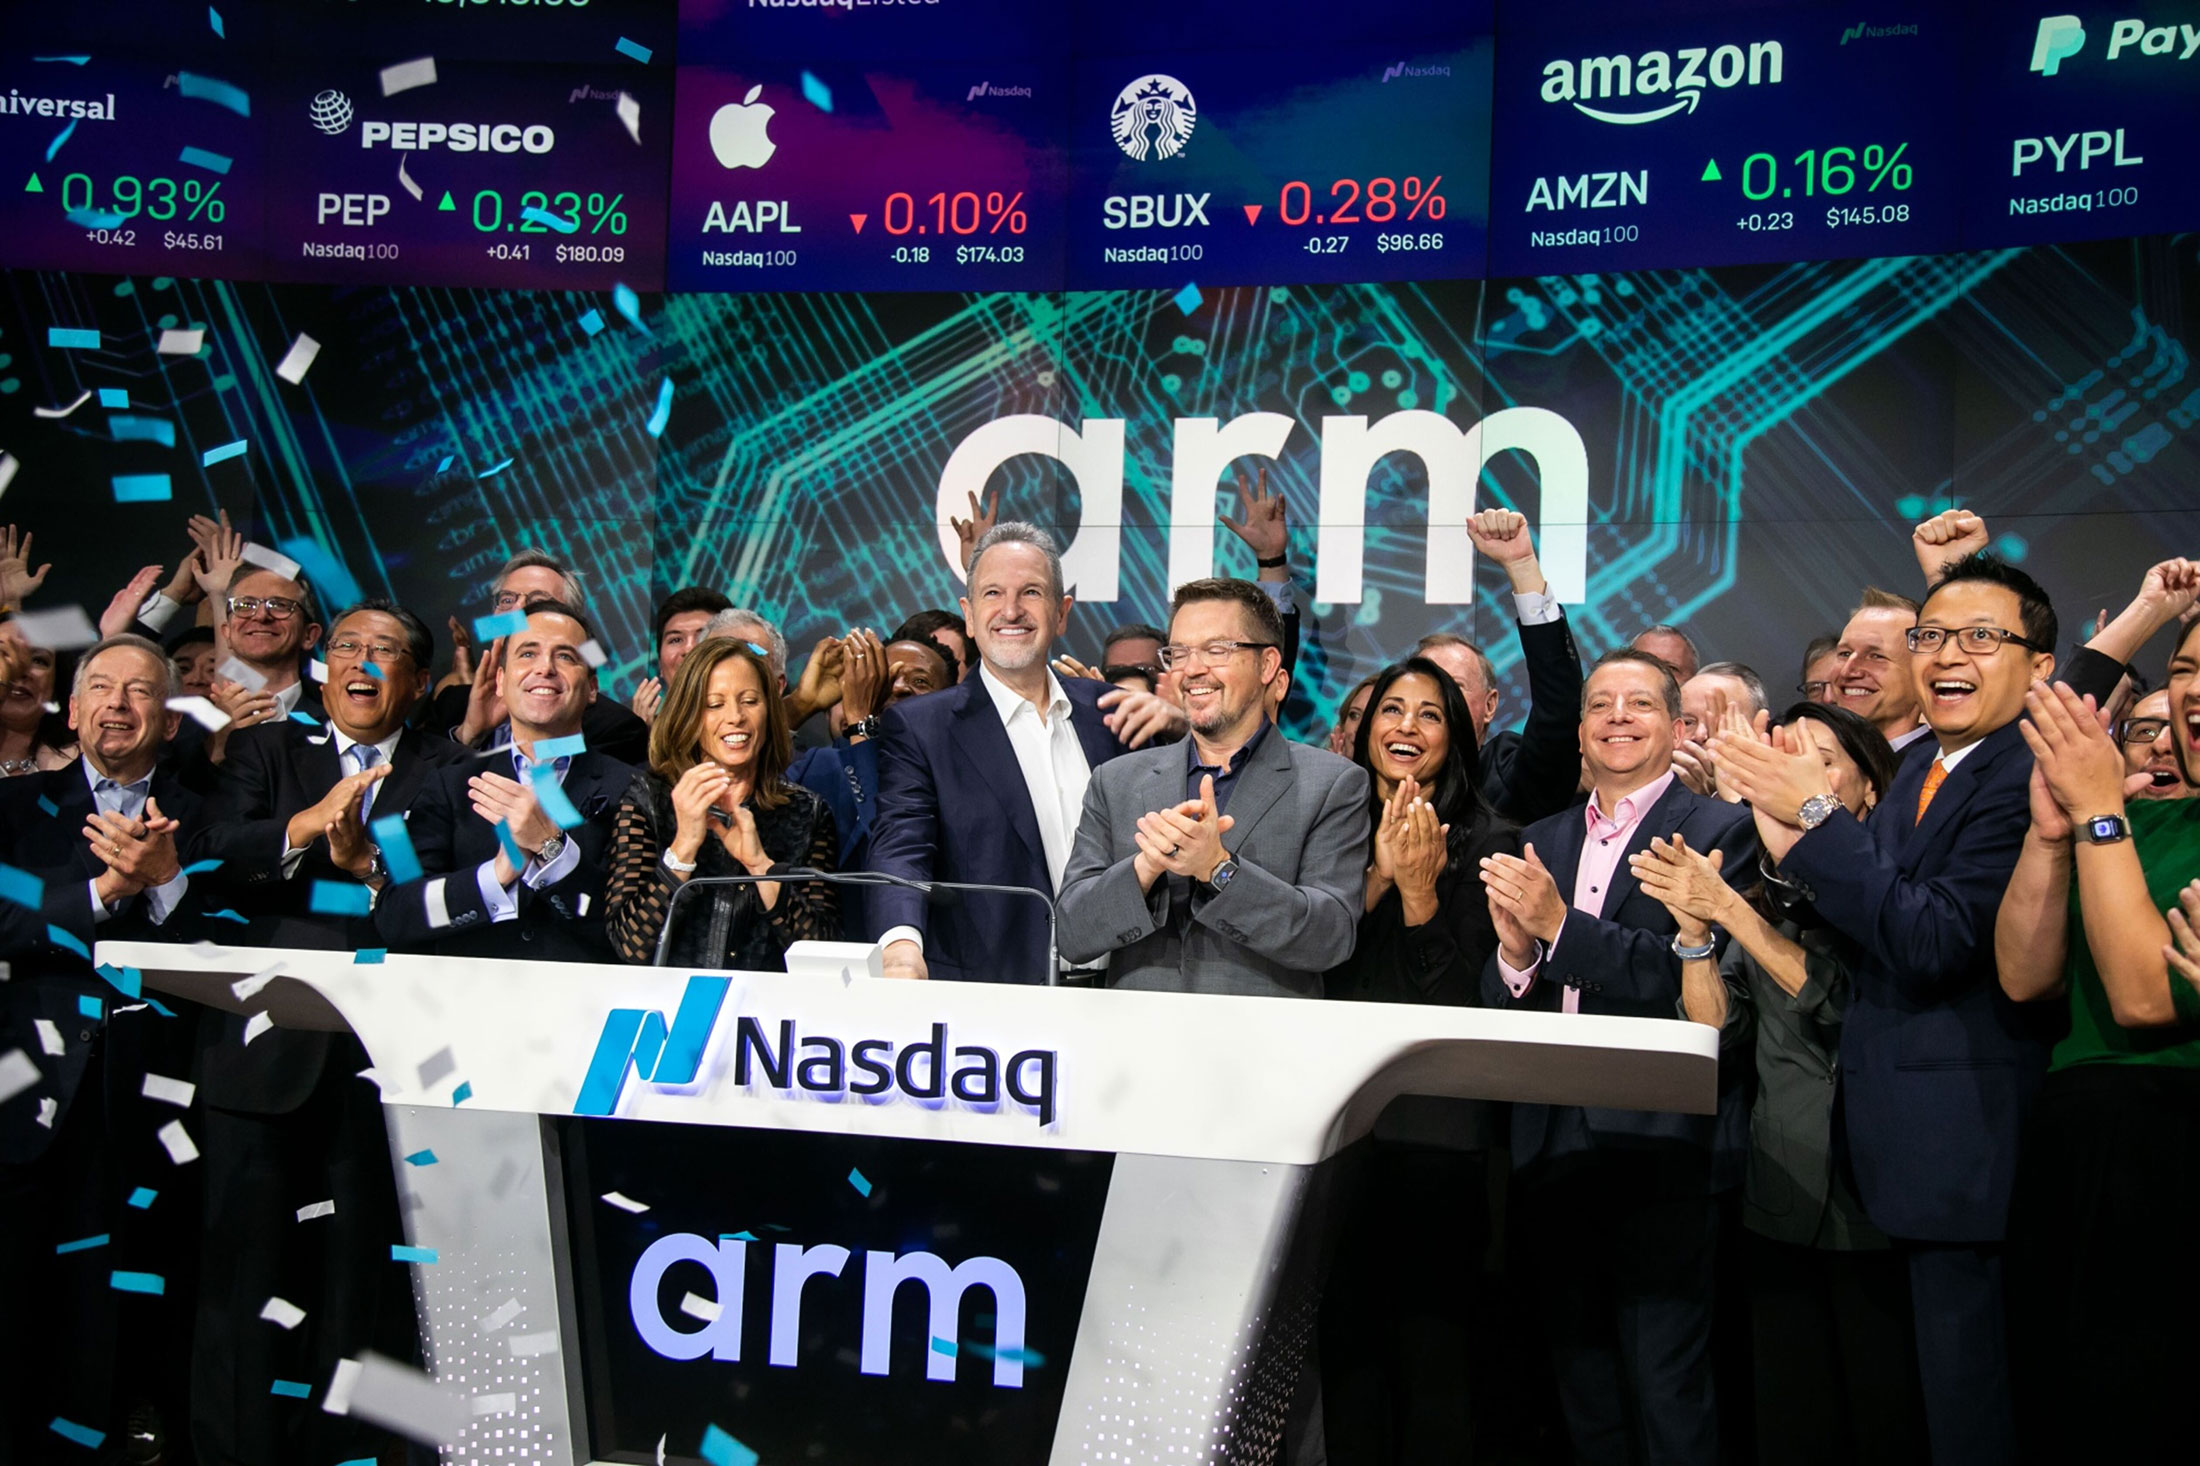 Arm Holdings CEO Rene Haas rings the opening bell at the Nasdaq MarketSite in Times Square.